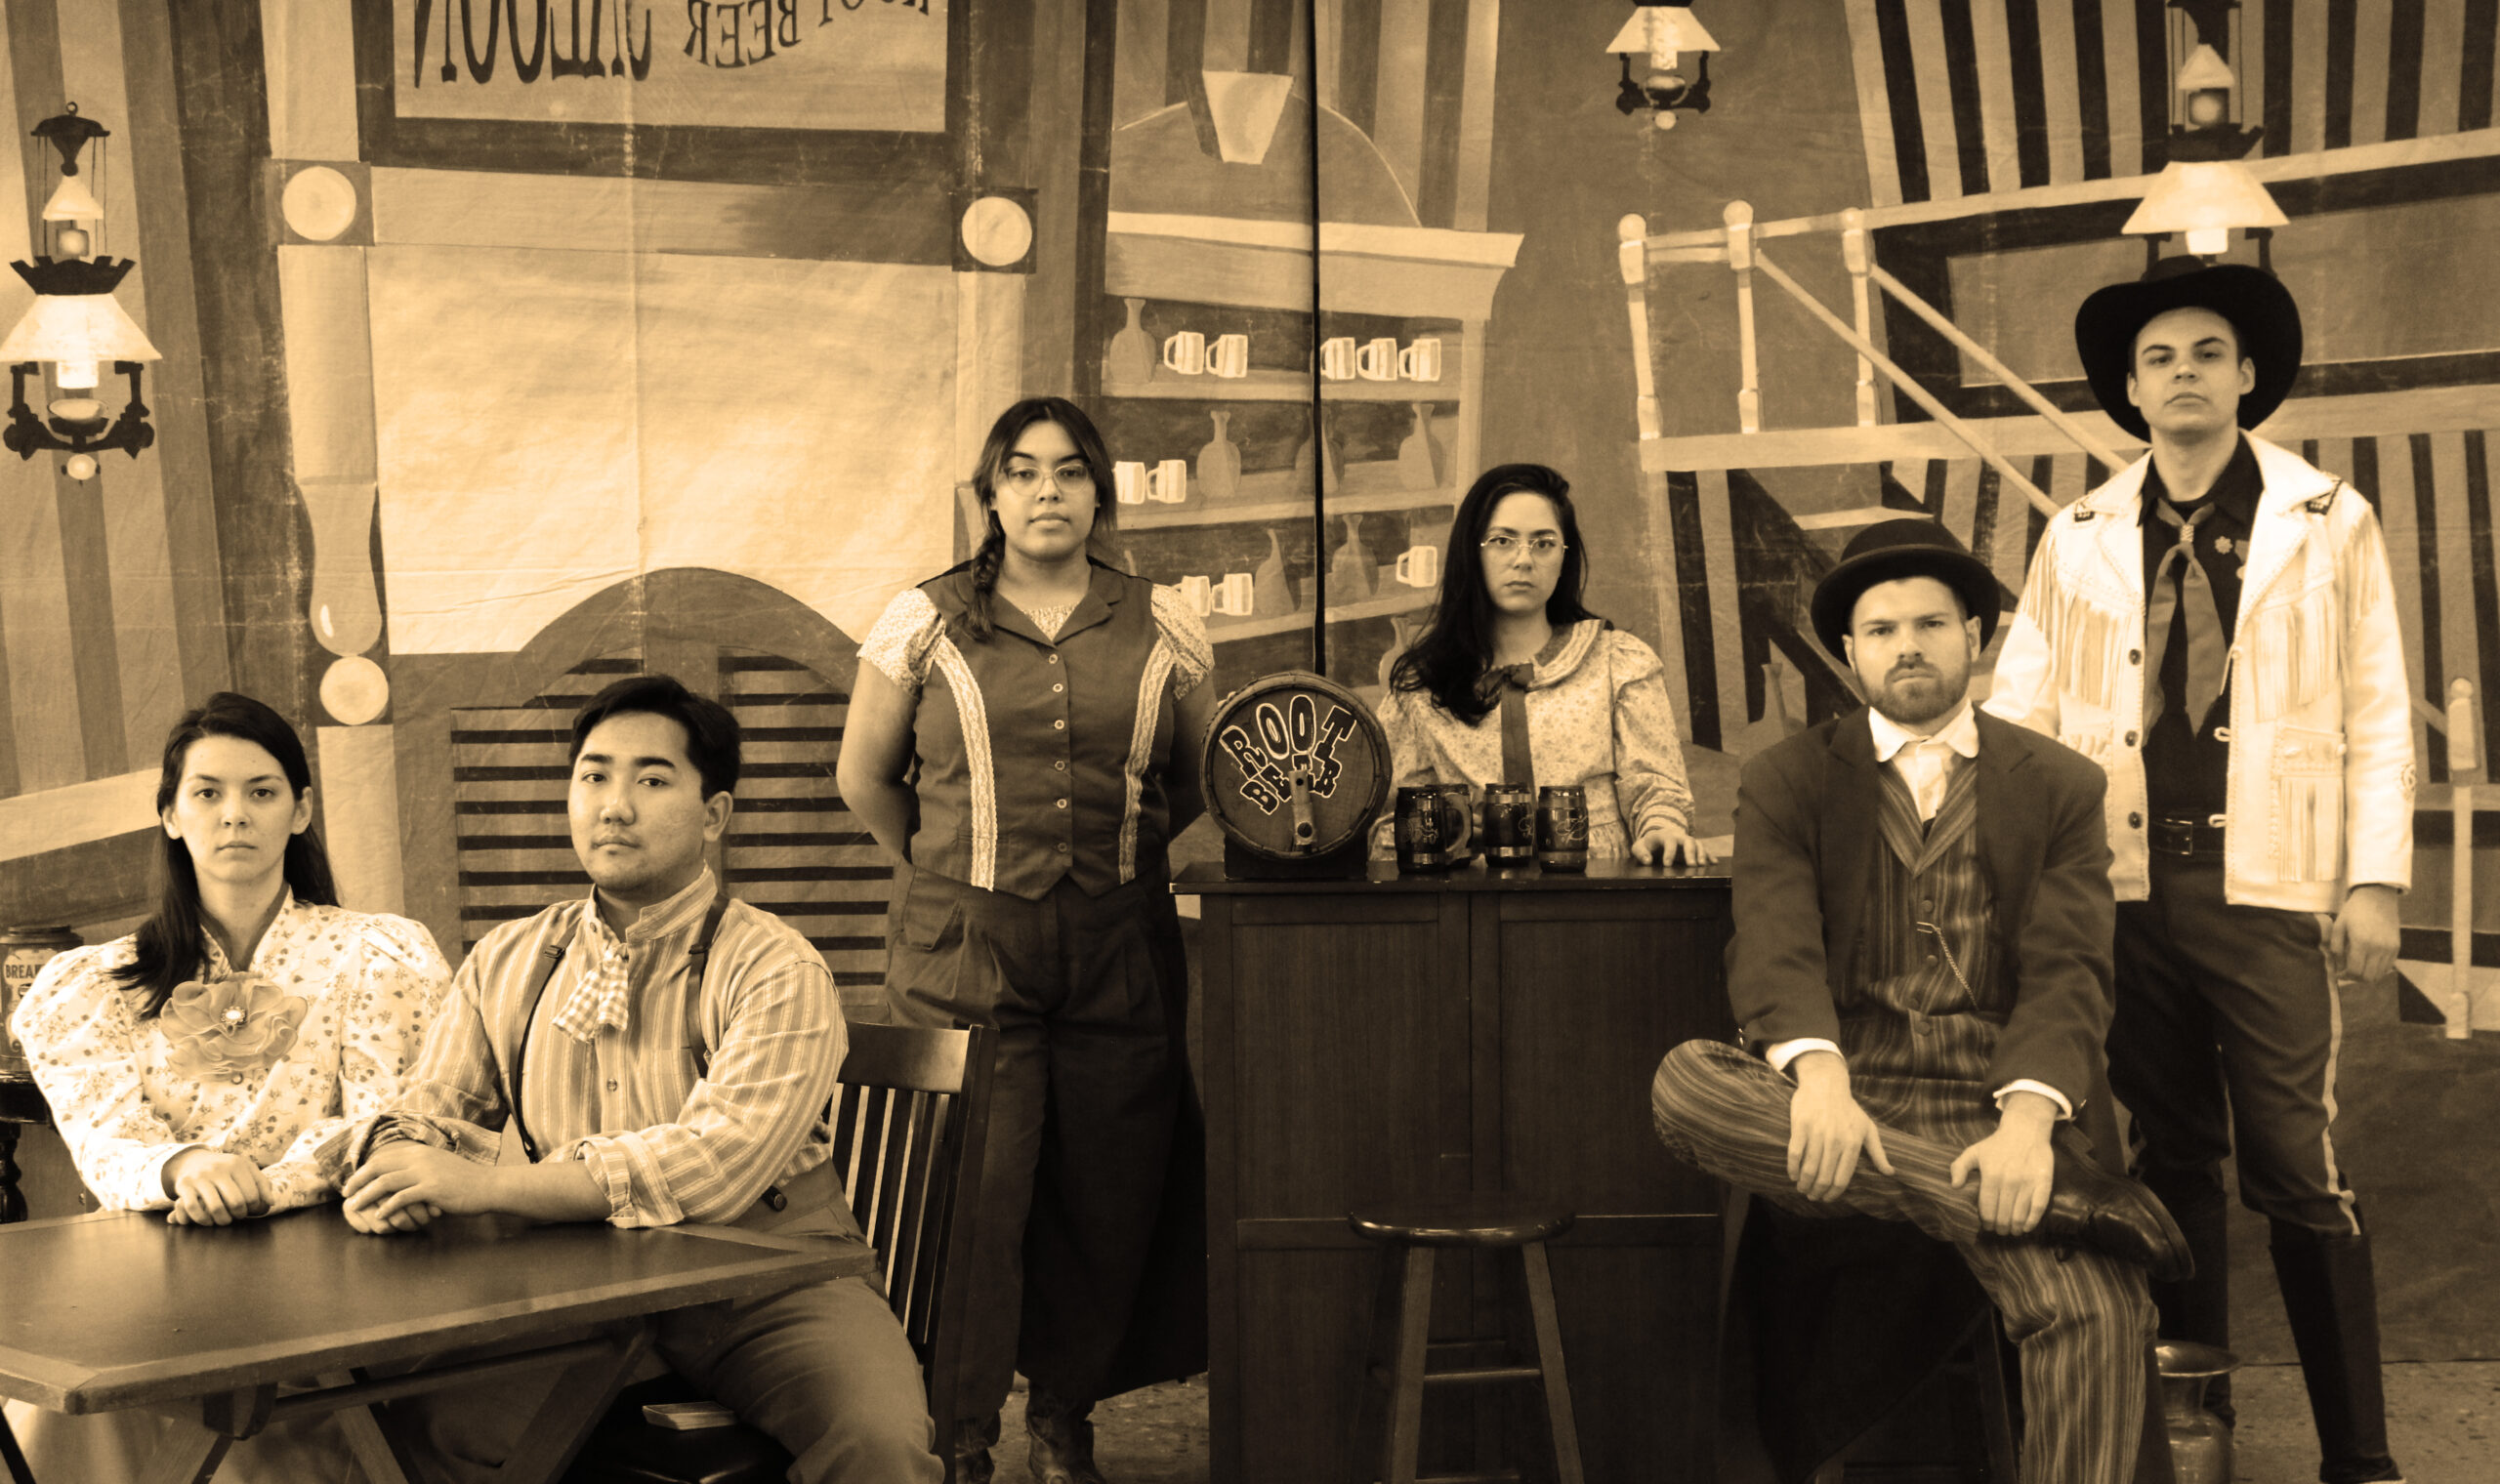 An old West style photo of a group of people sitting and standing in a saloon